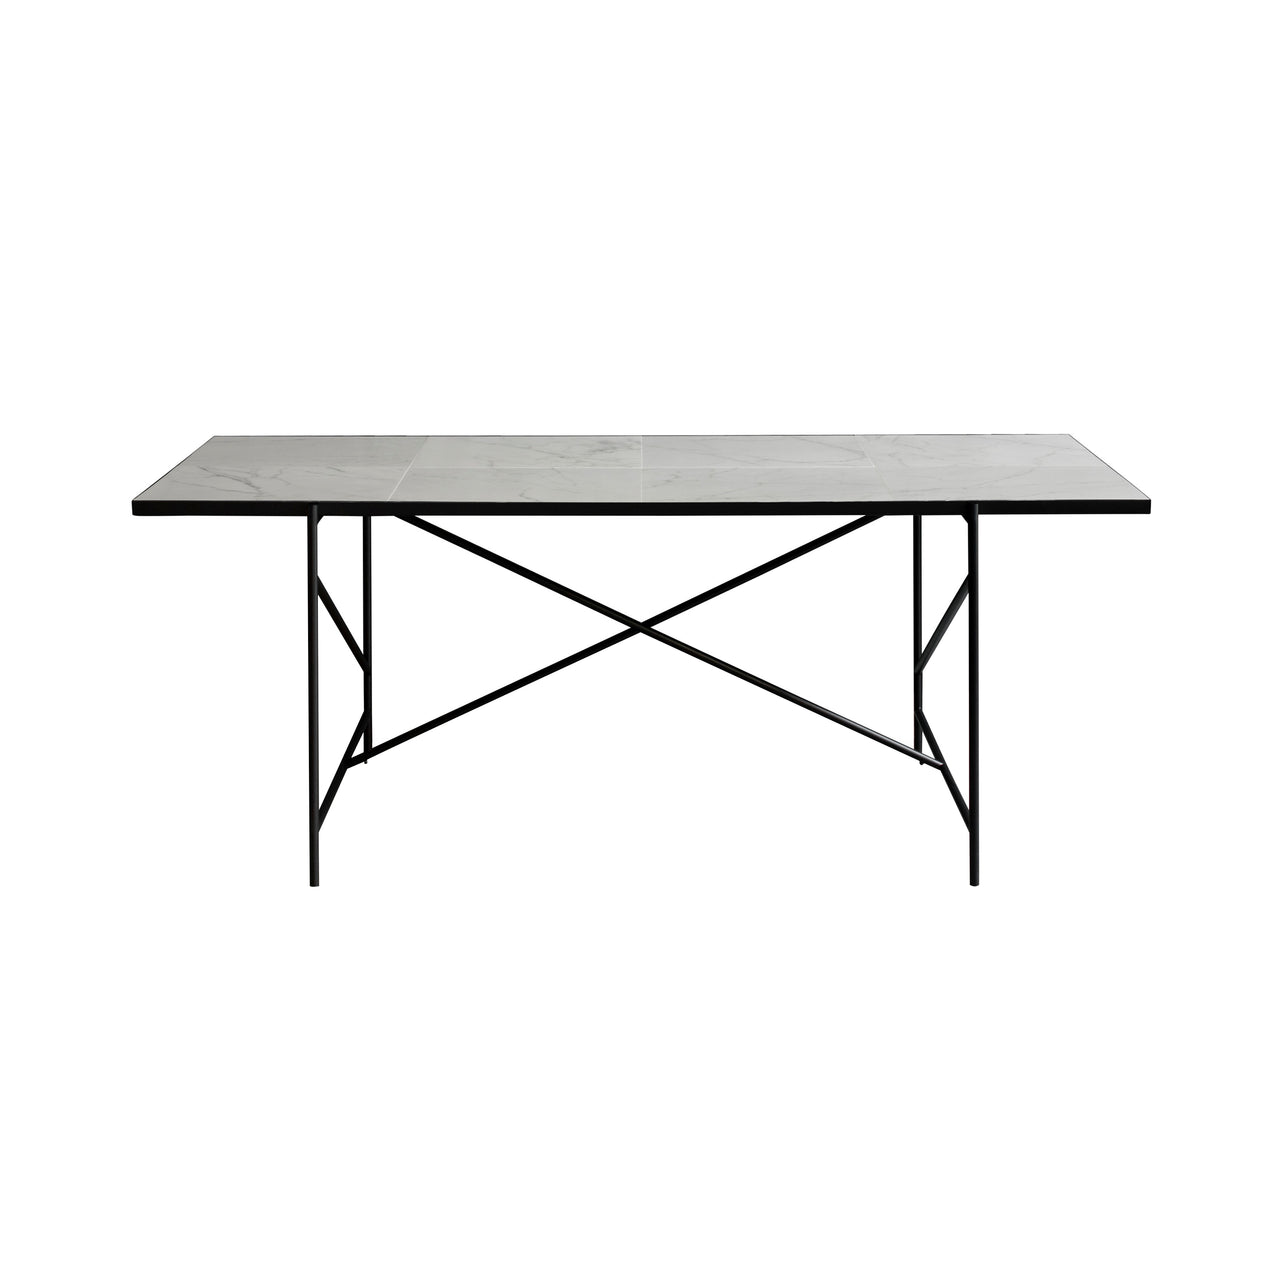 Dining Table 185: Black + White Marble